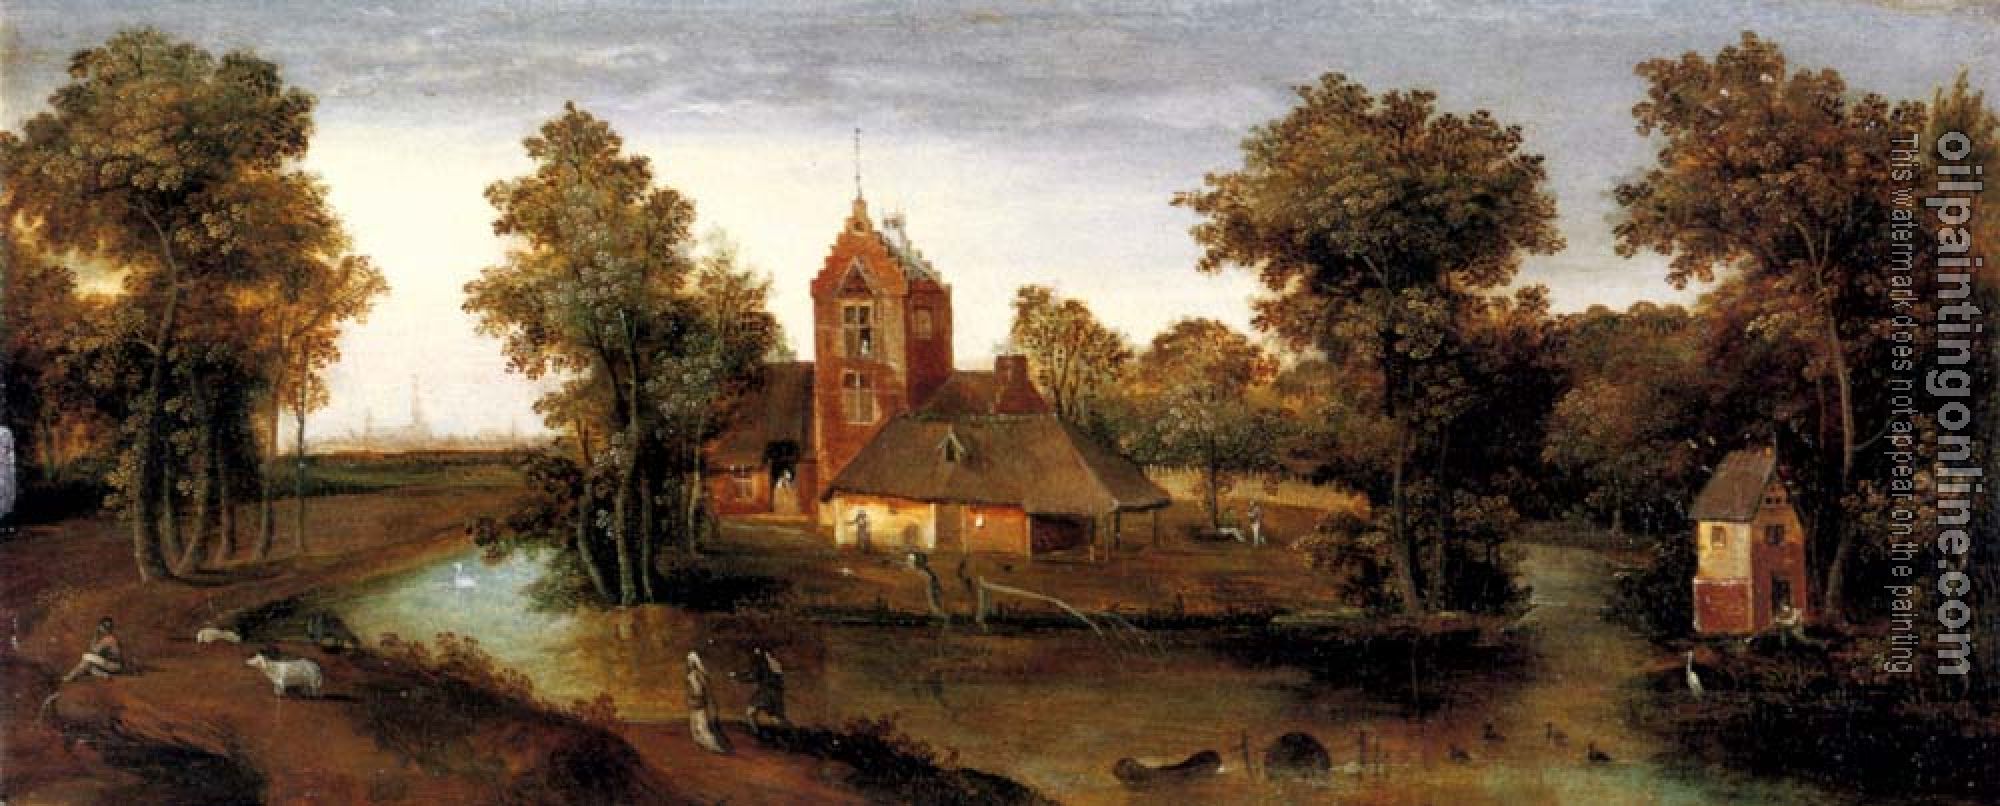 Grimmer, Abel - A Moated Tower With Farmhouses